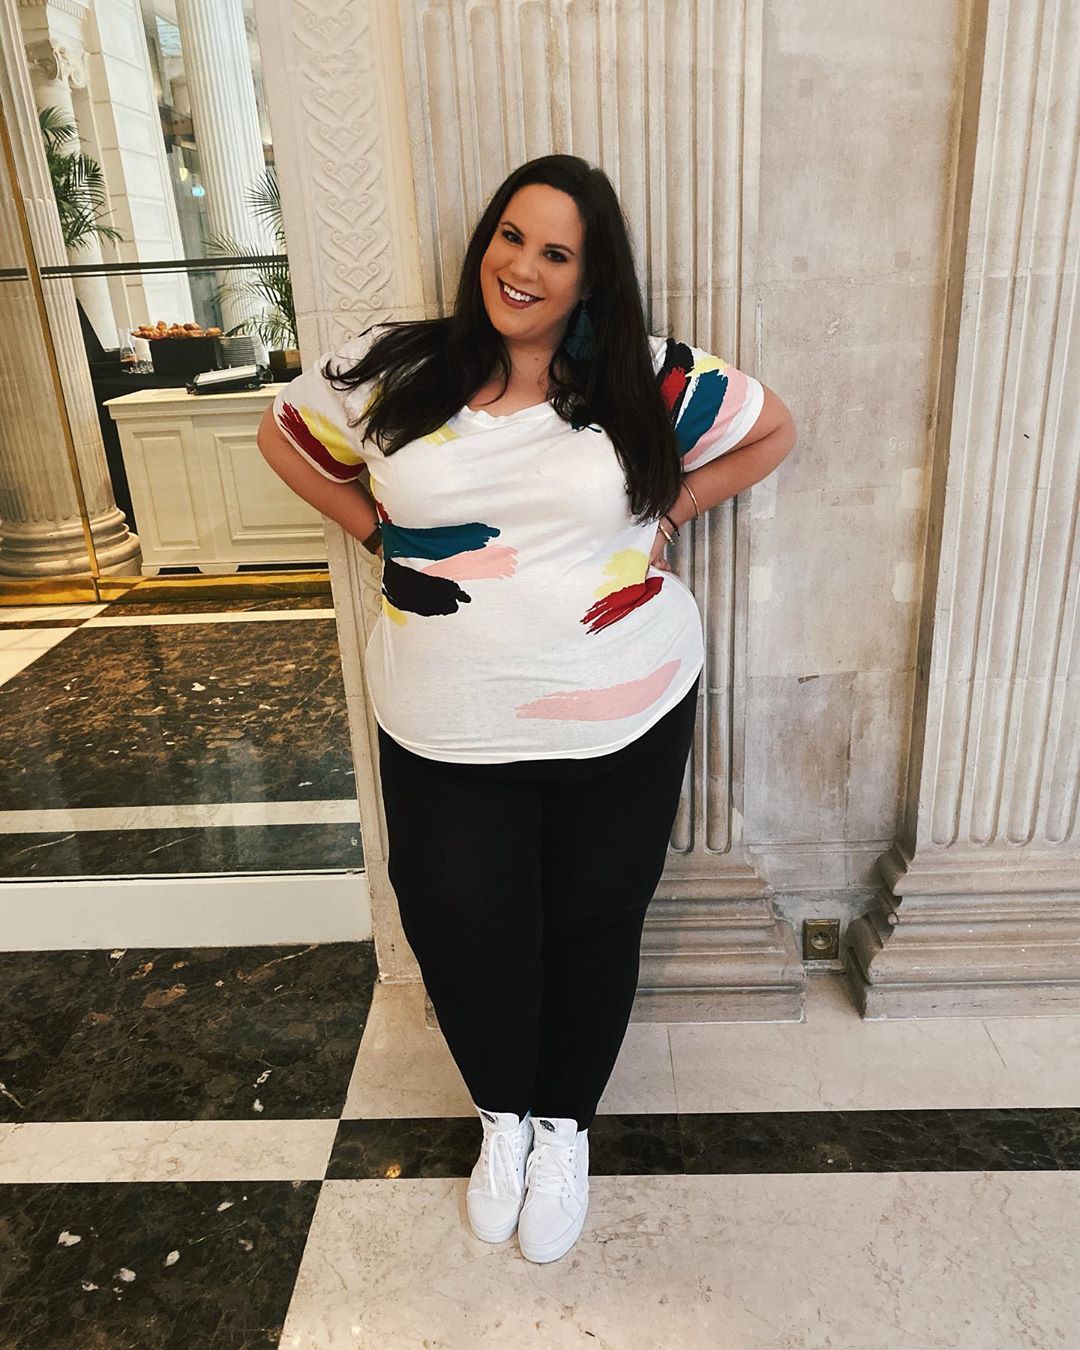 Big Fat Naked Baby - Whitney Way Thore Responds to Criticism After Calling Herself 'Fat'